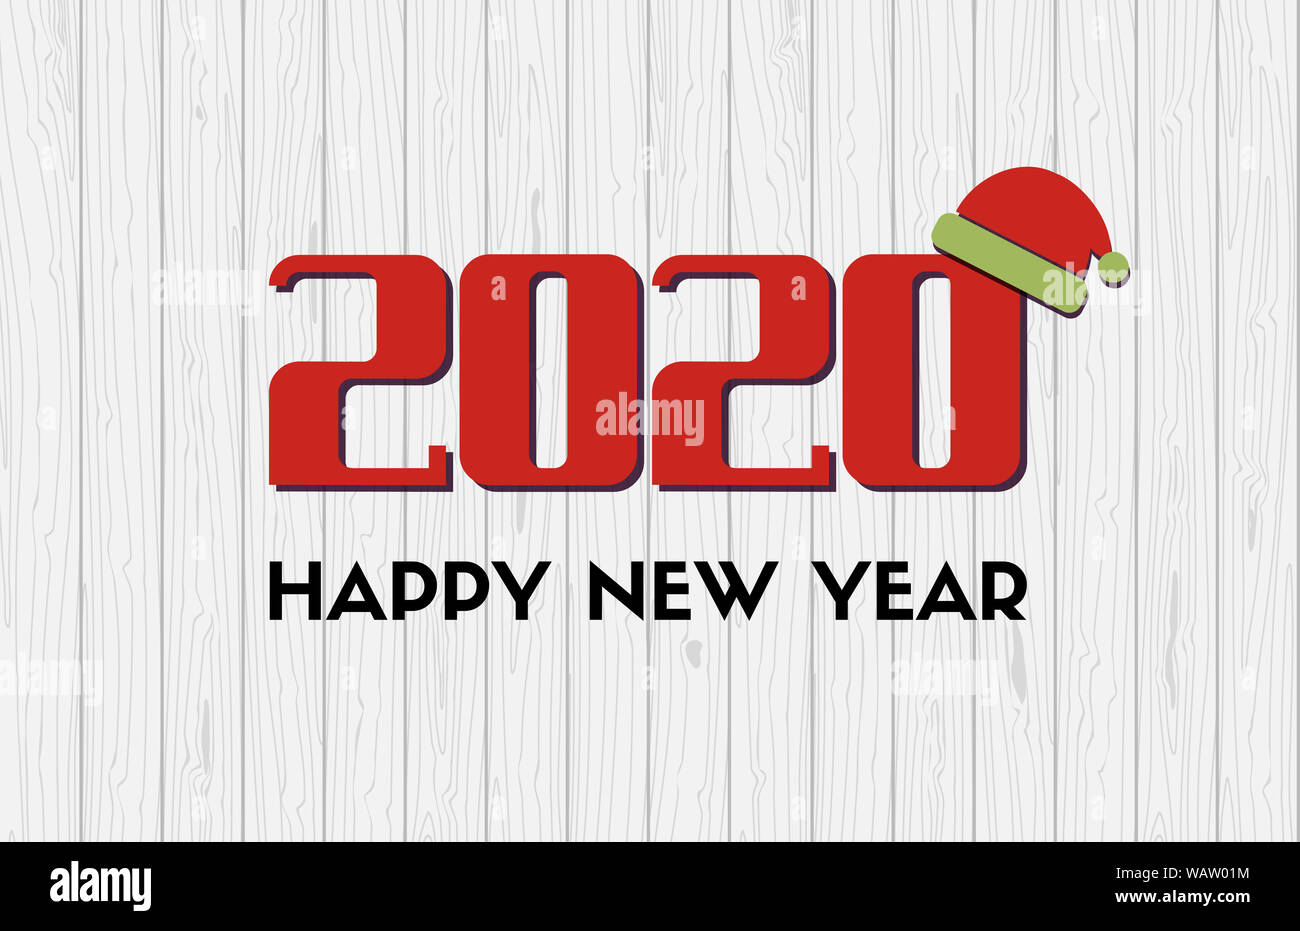 2020. Happy New Year. Greeting card with wooden background. Flat lay Stock Photo